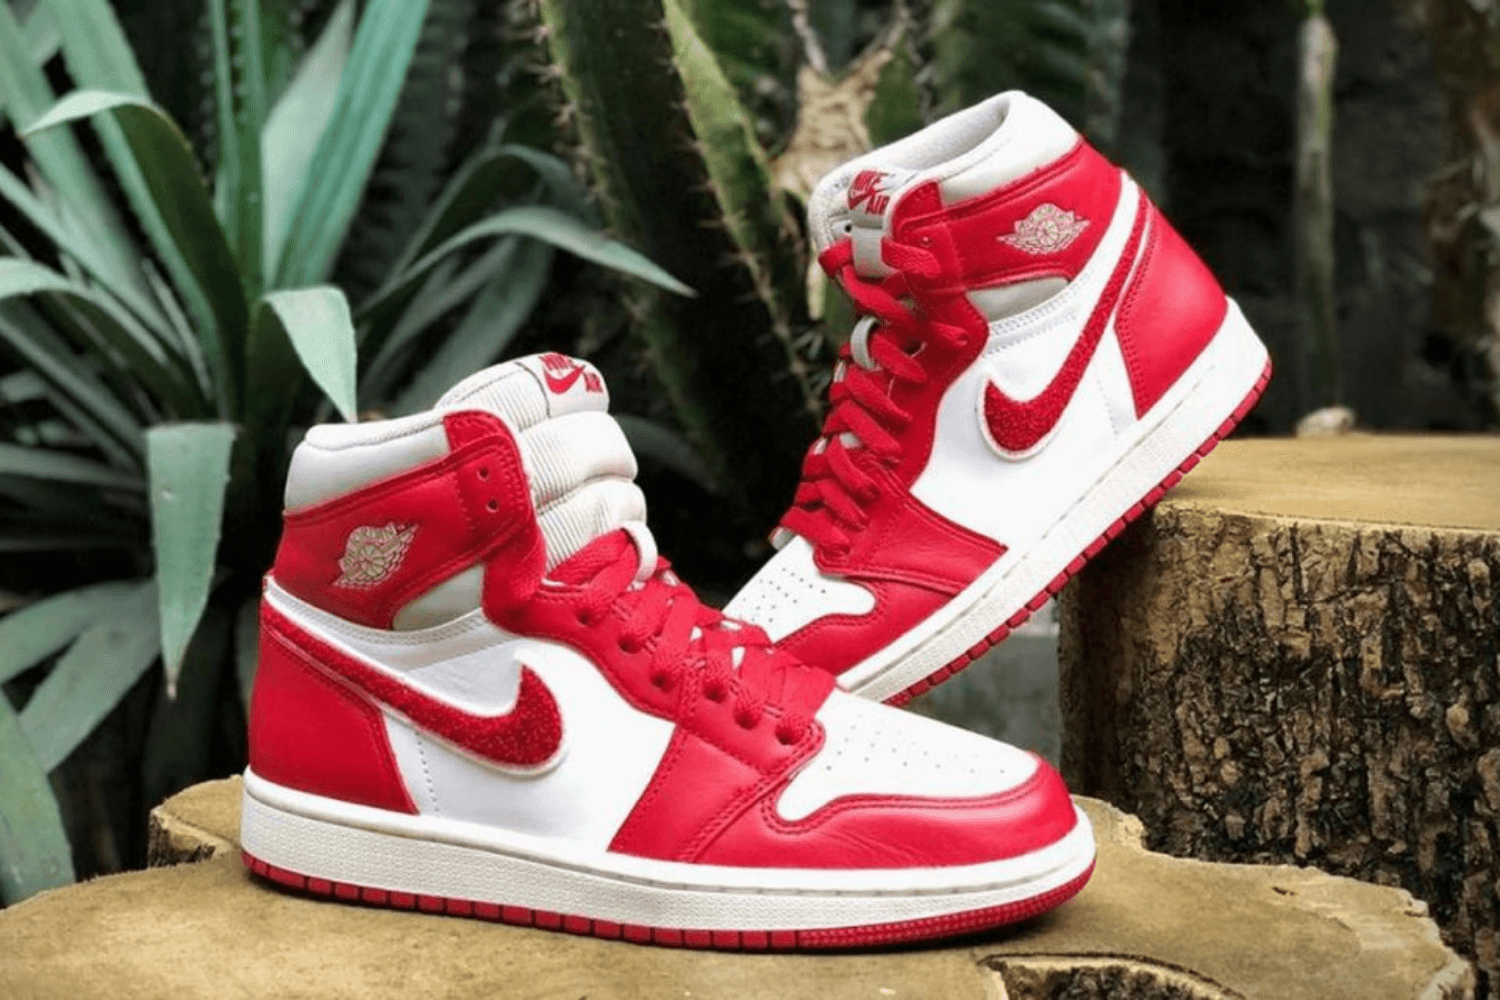 Air Jordan 1 High OG comes in a 'Chenille' colorway